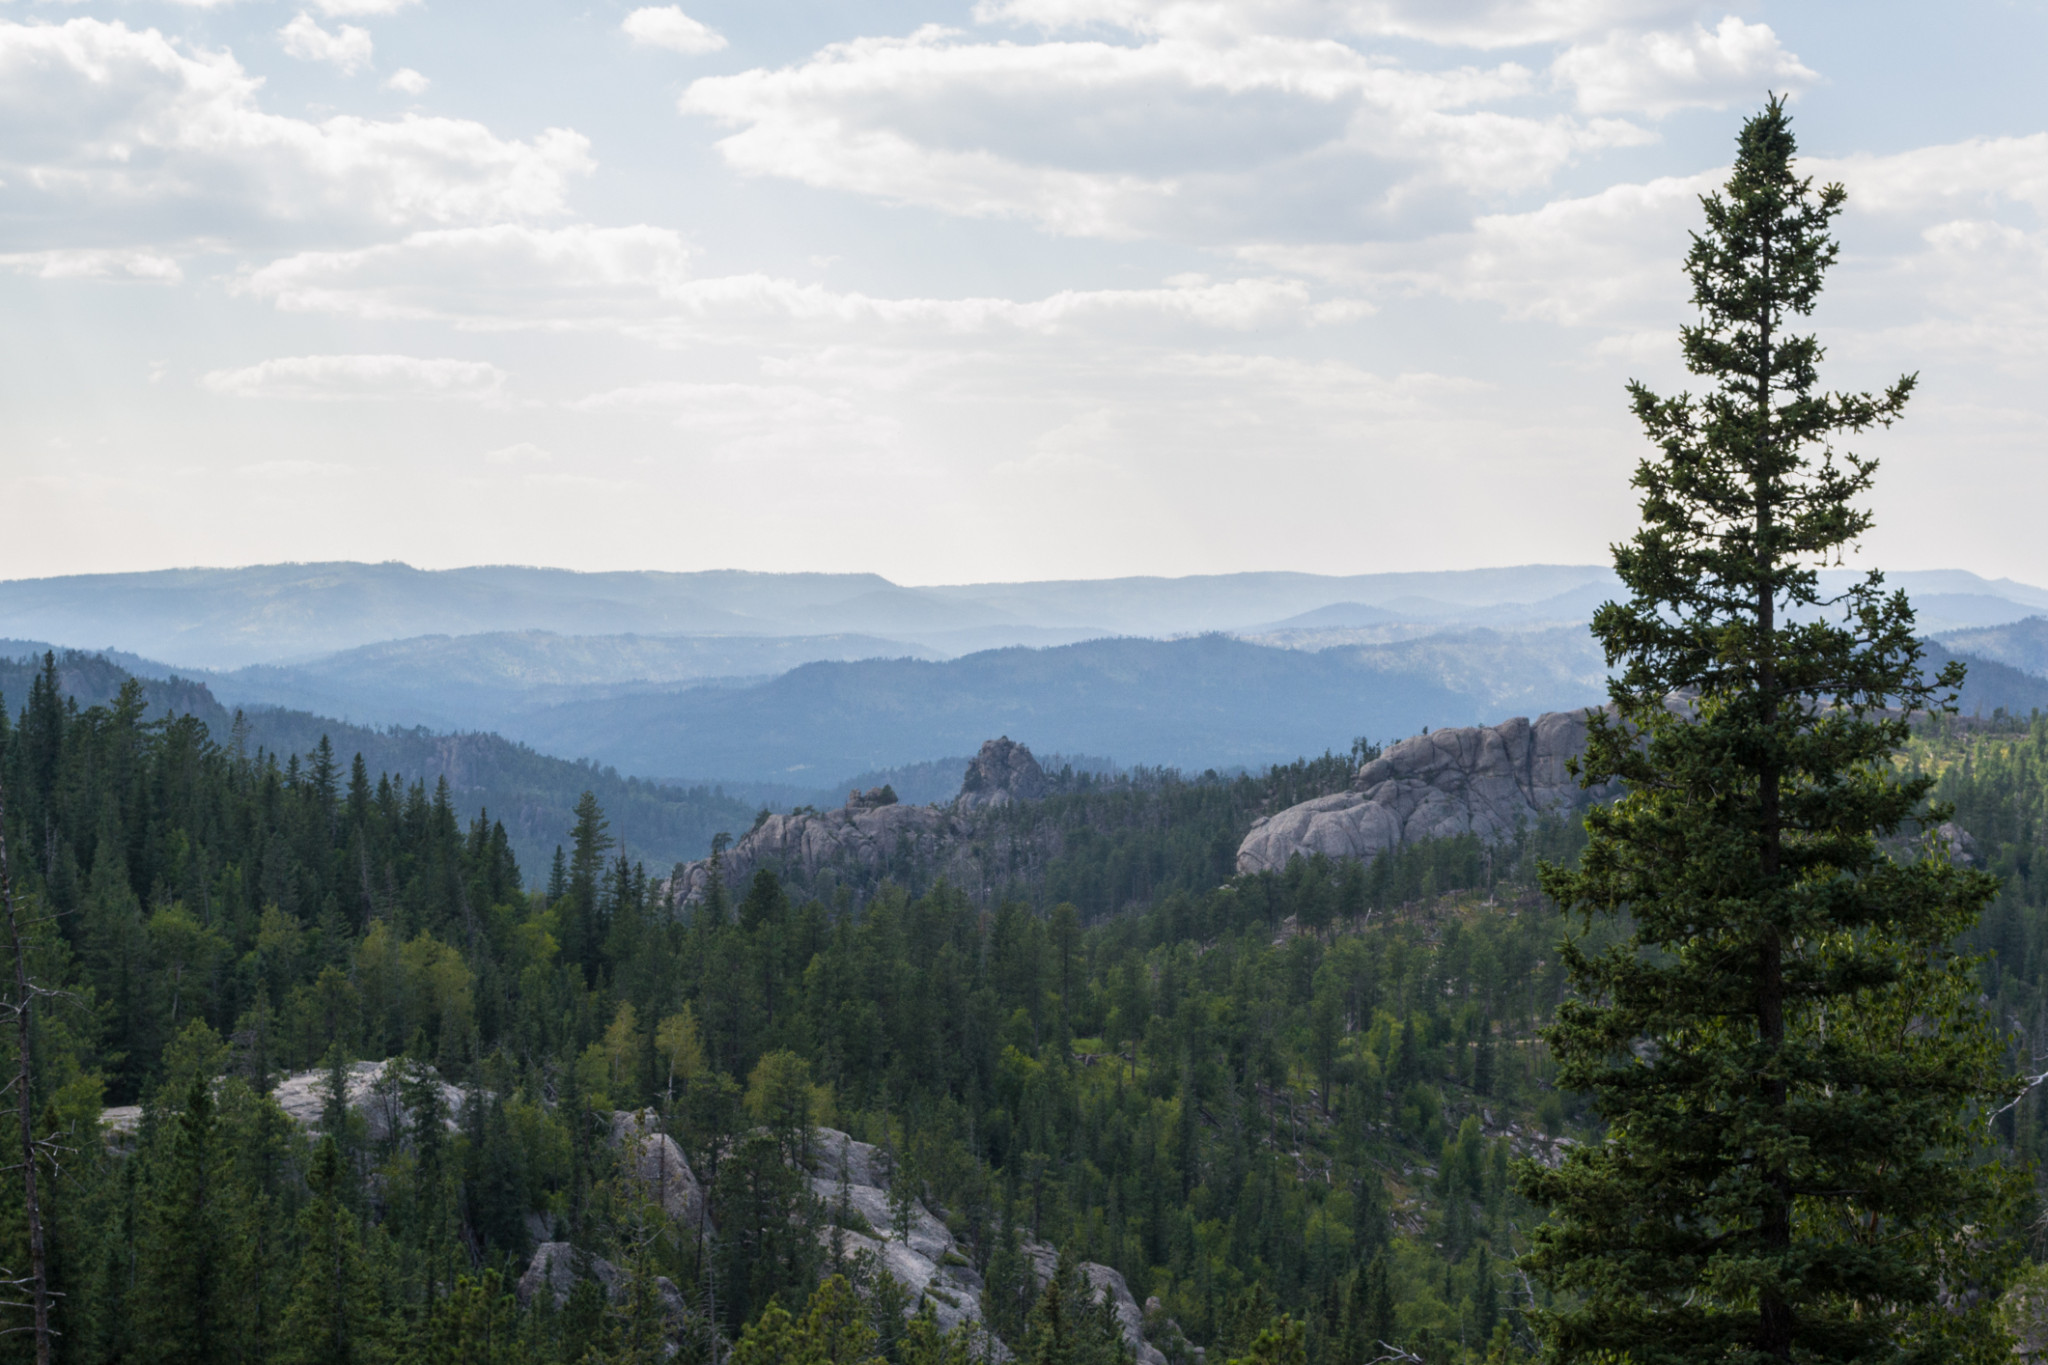 The Black Hills National Forest in South Dakota.